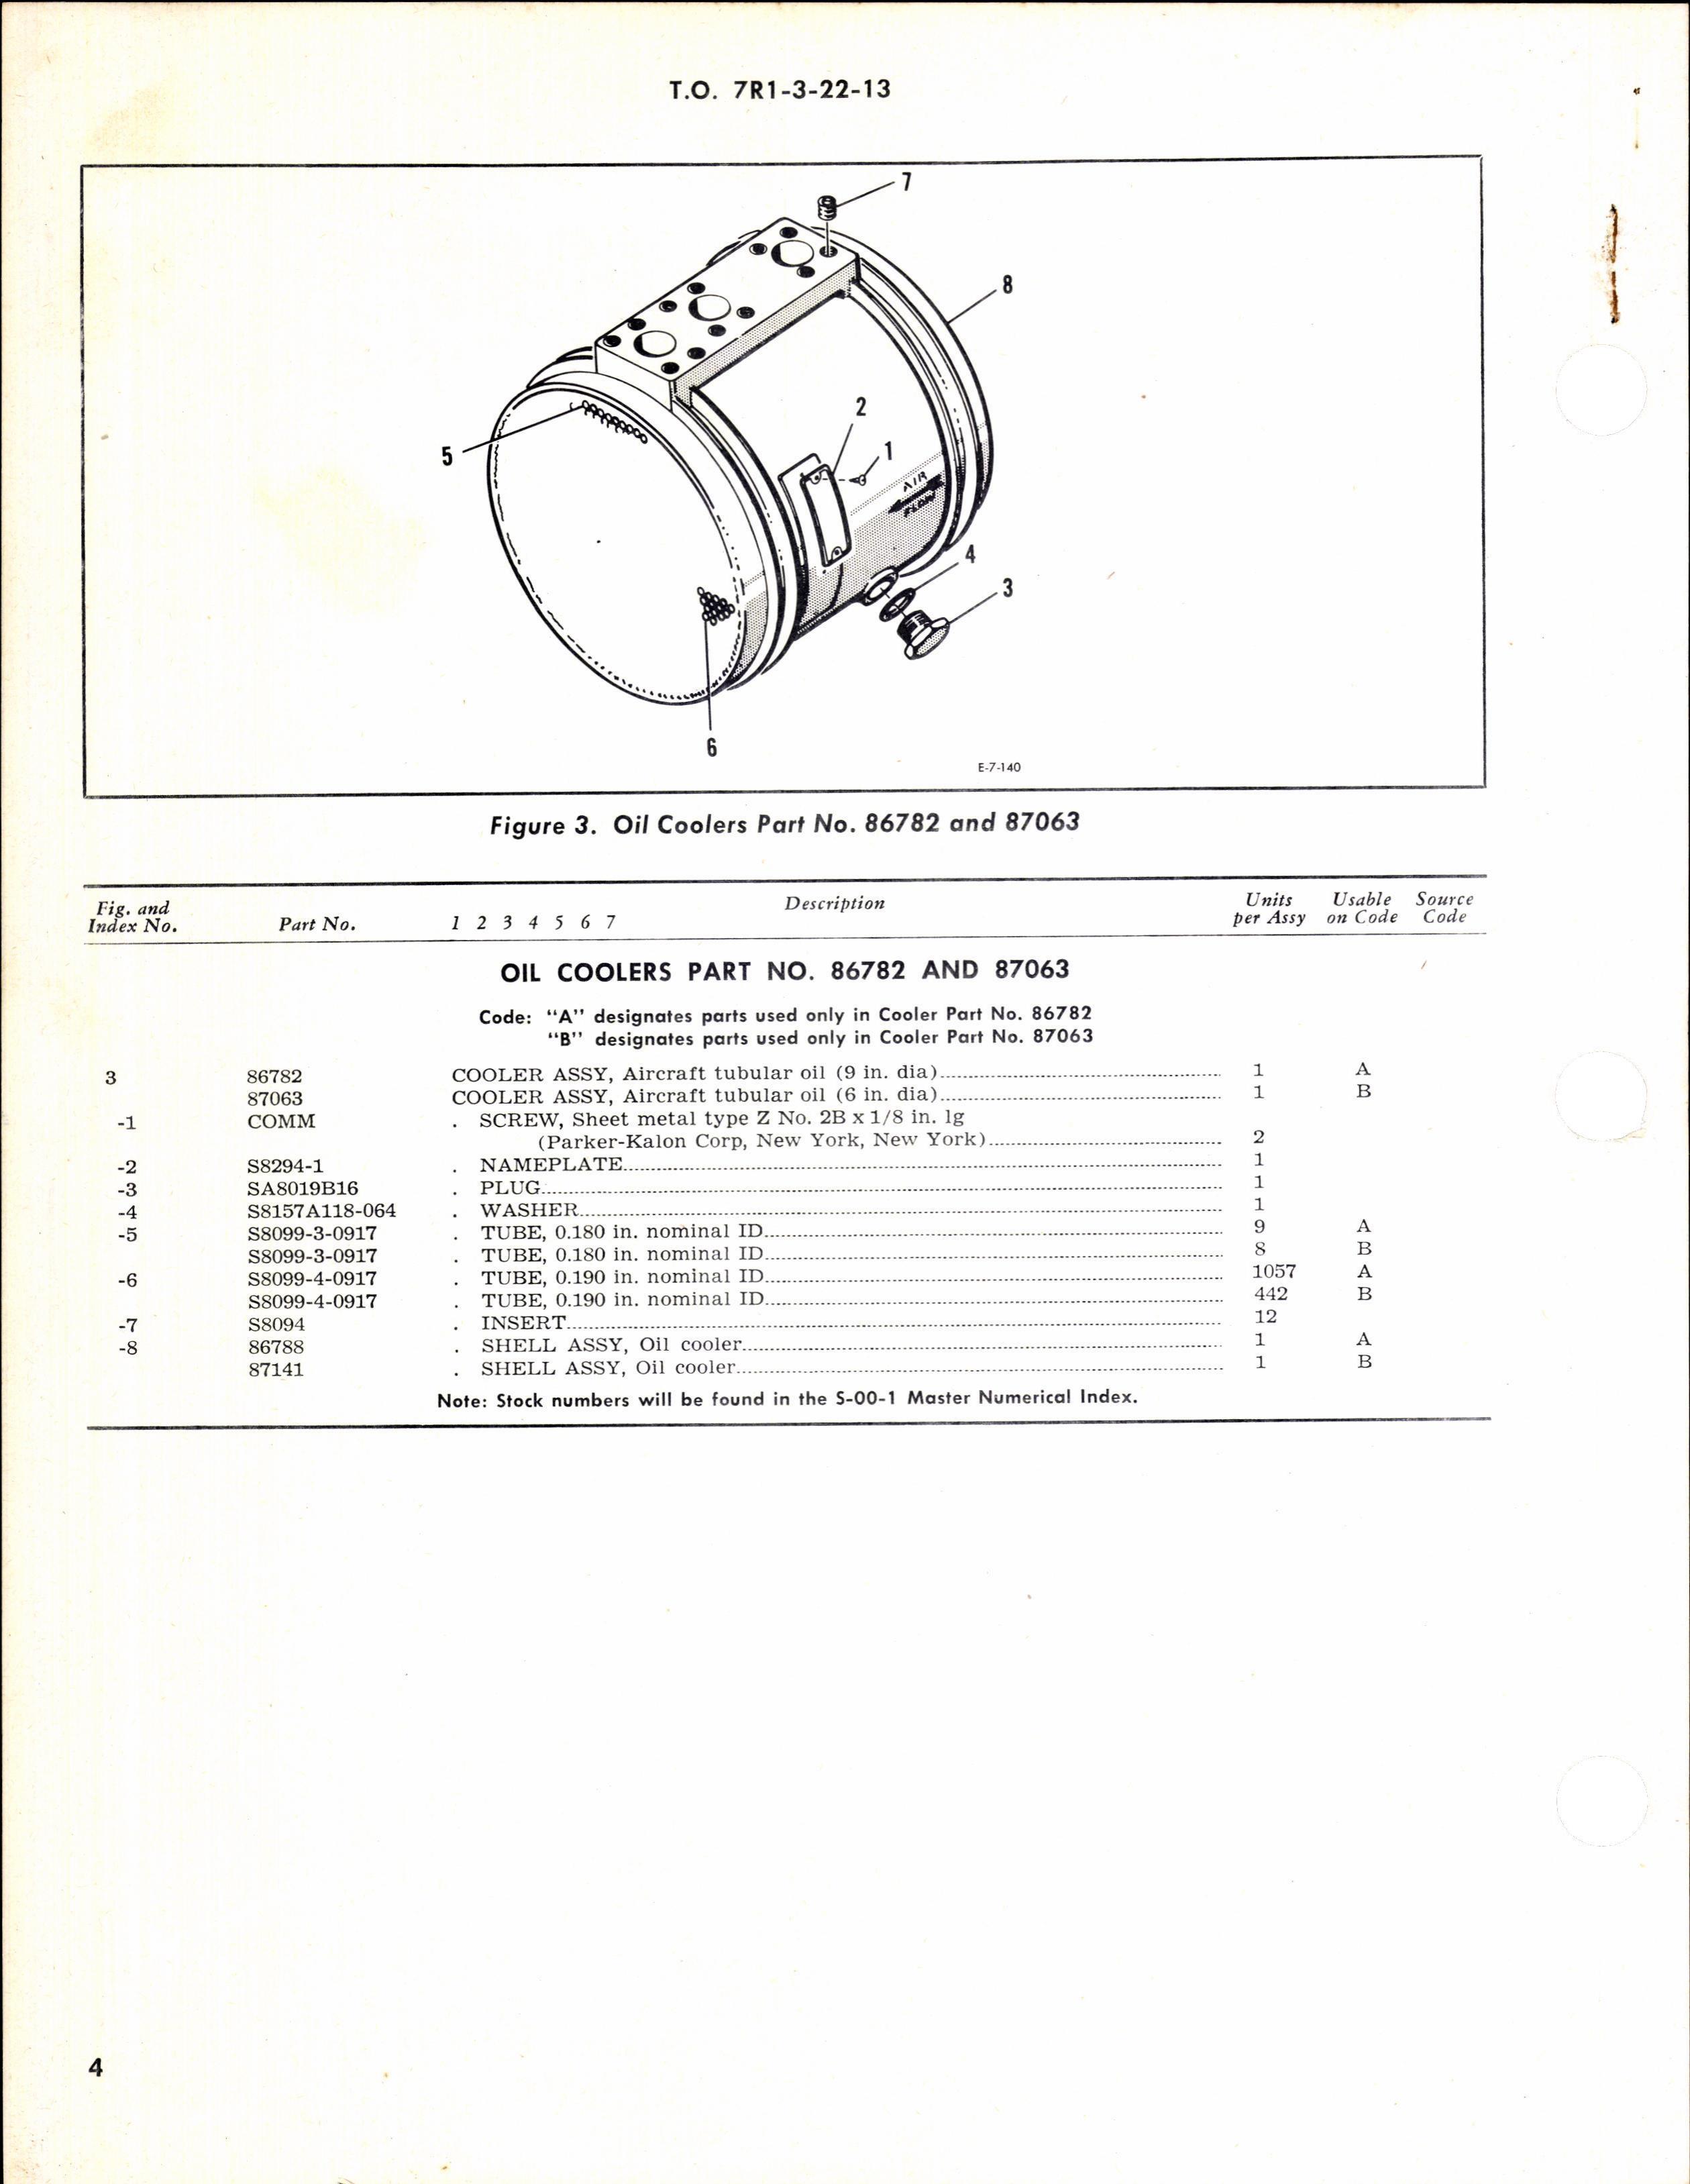 Sample page 4 from AirCorps Library document: Overhaul Instructions with Parts Breakdown for Oil Coolers